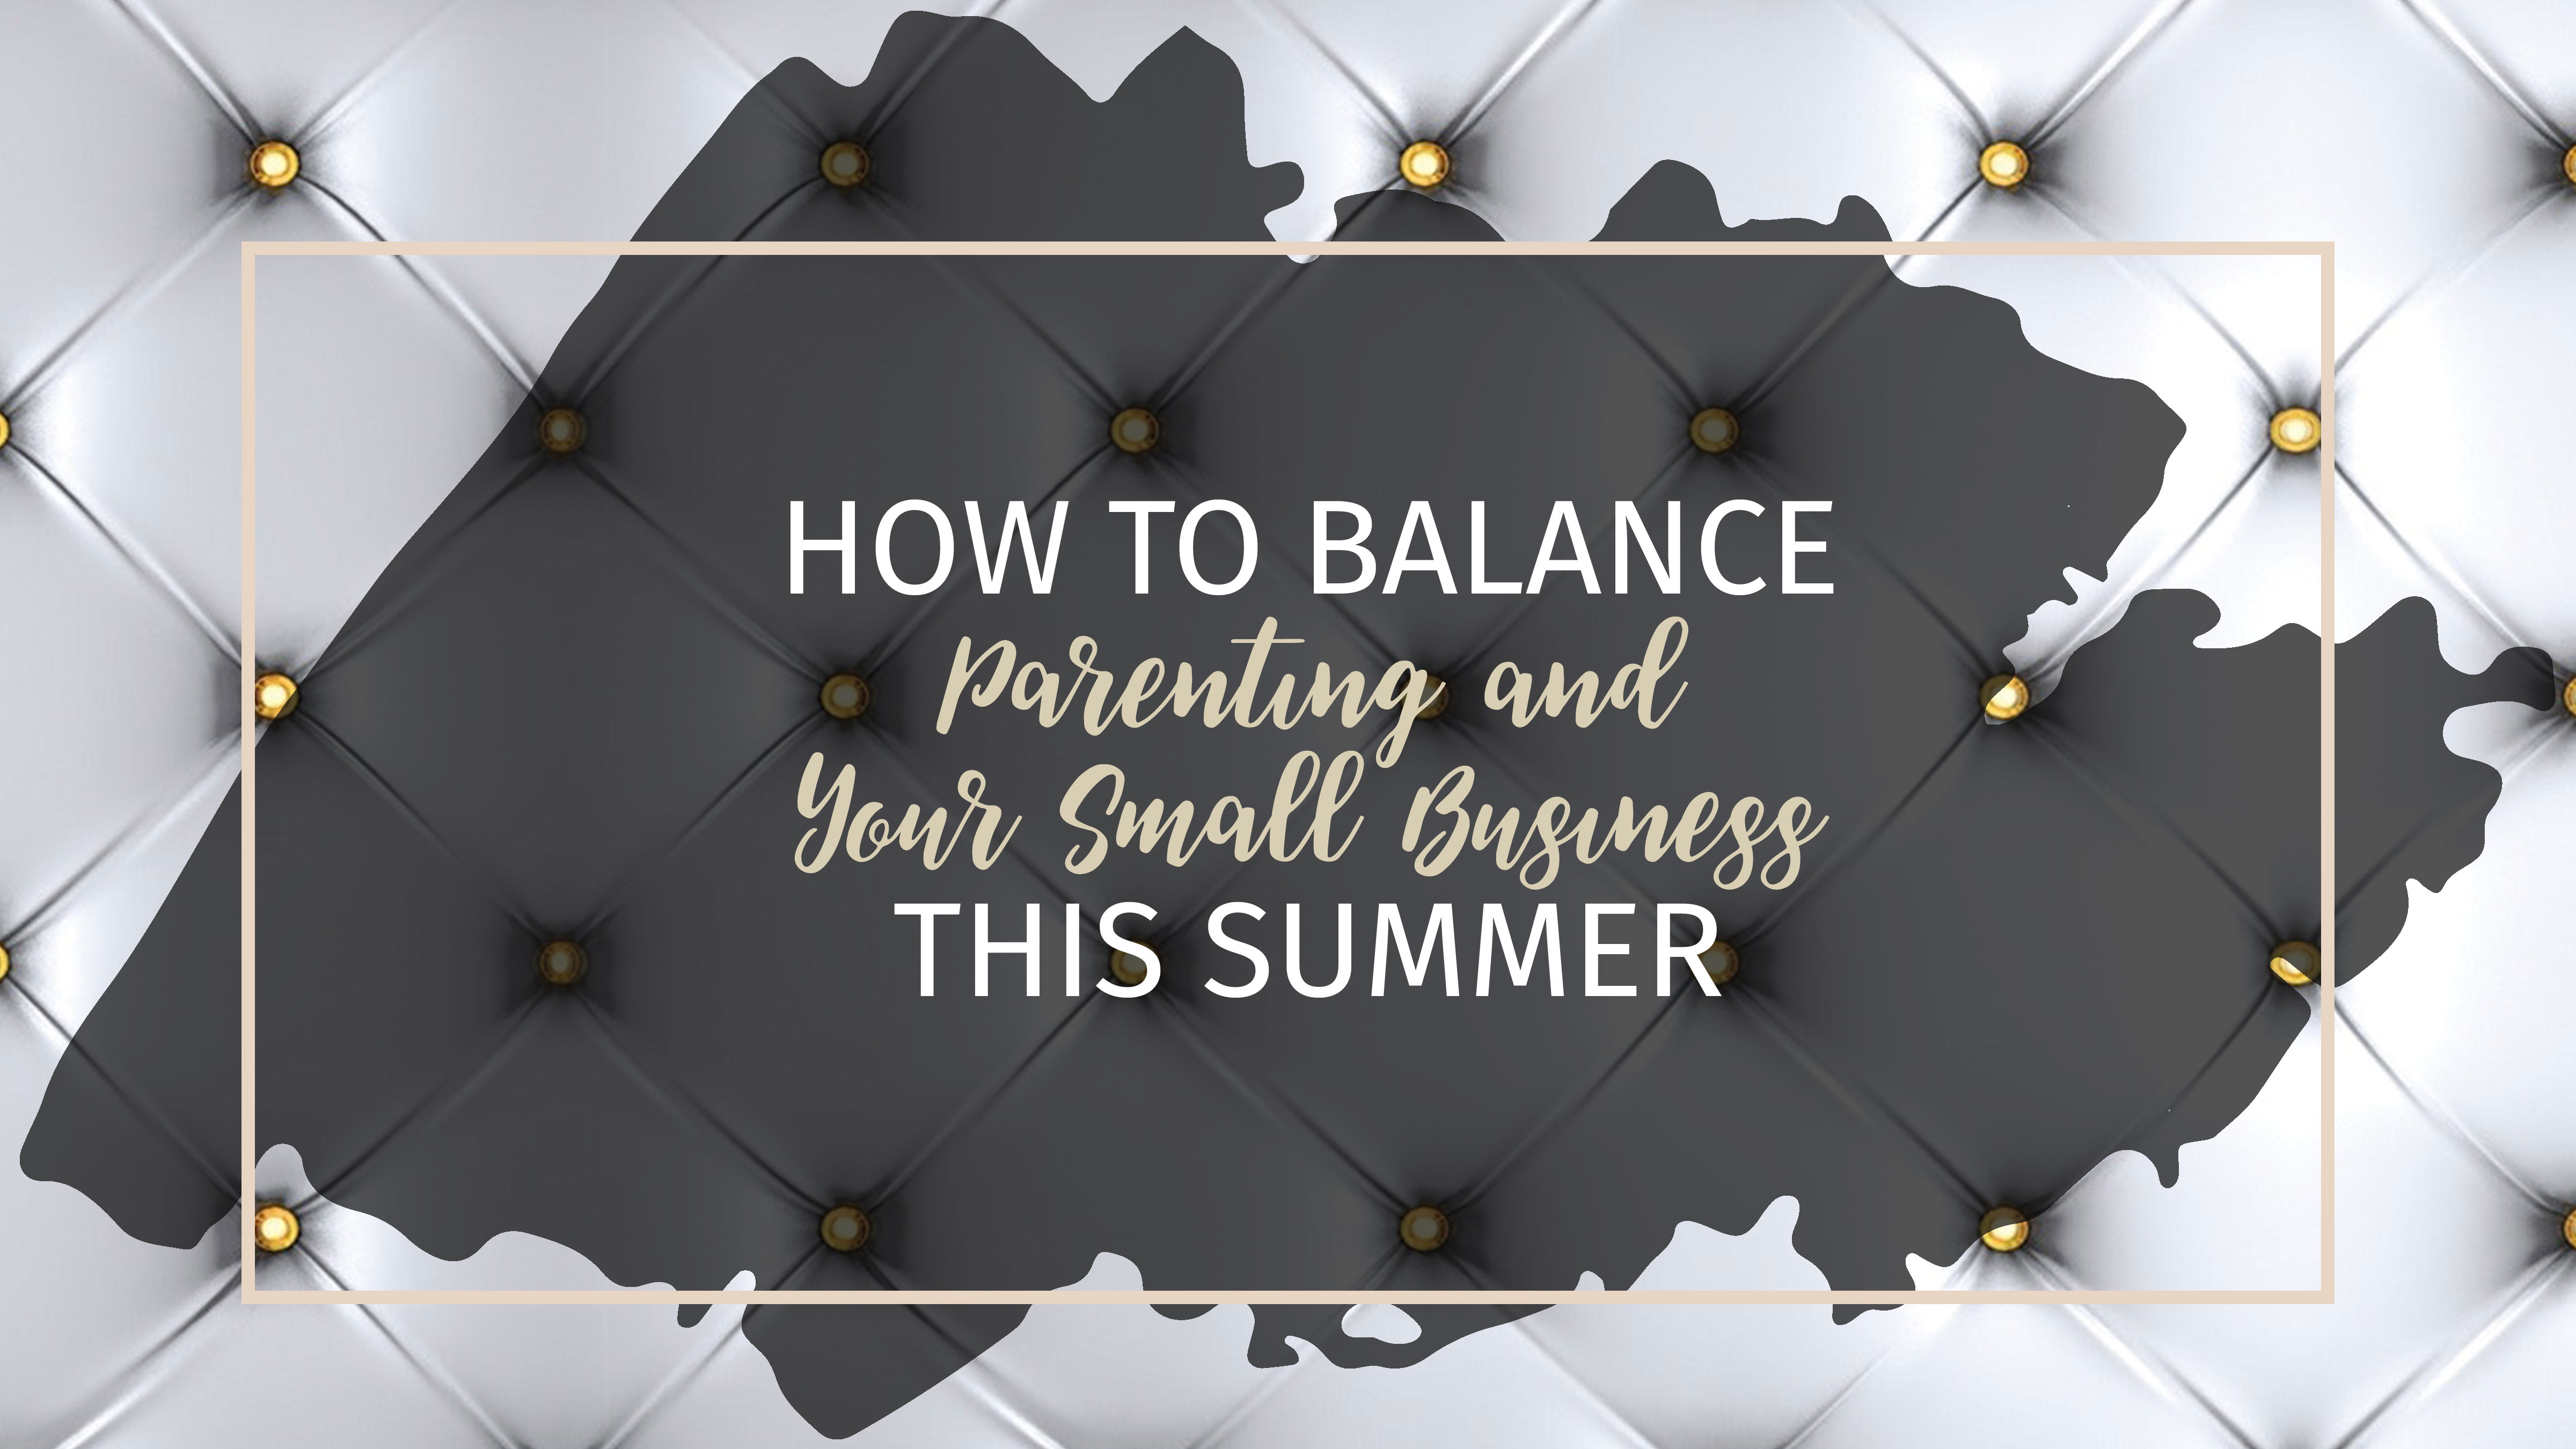 Text: How to Balance Parenting and Your Small Business This Summer Background: Metallic textured background with gold buttons